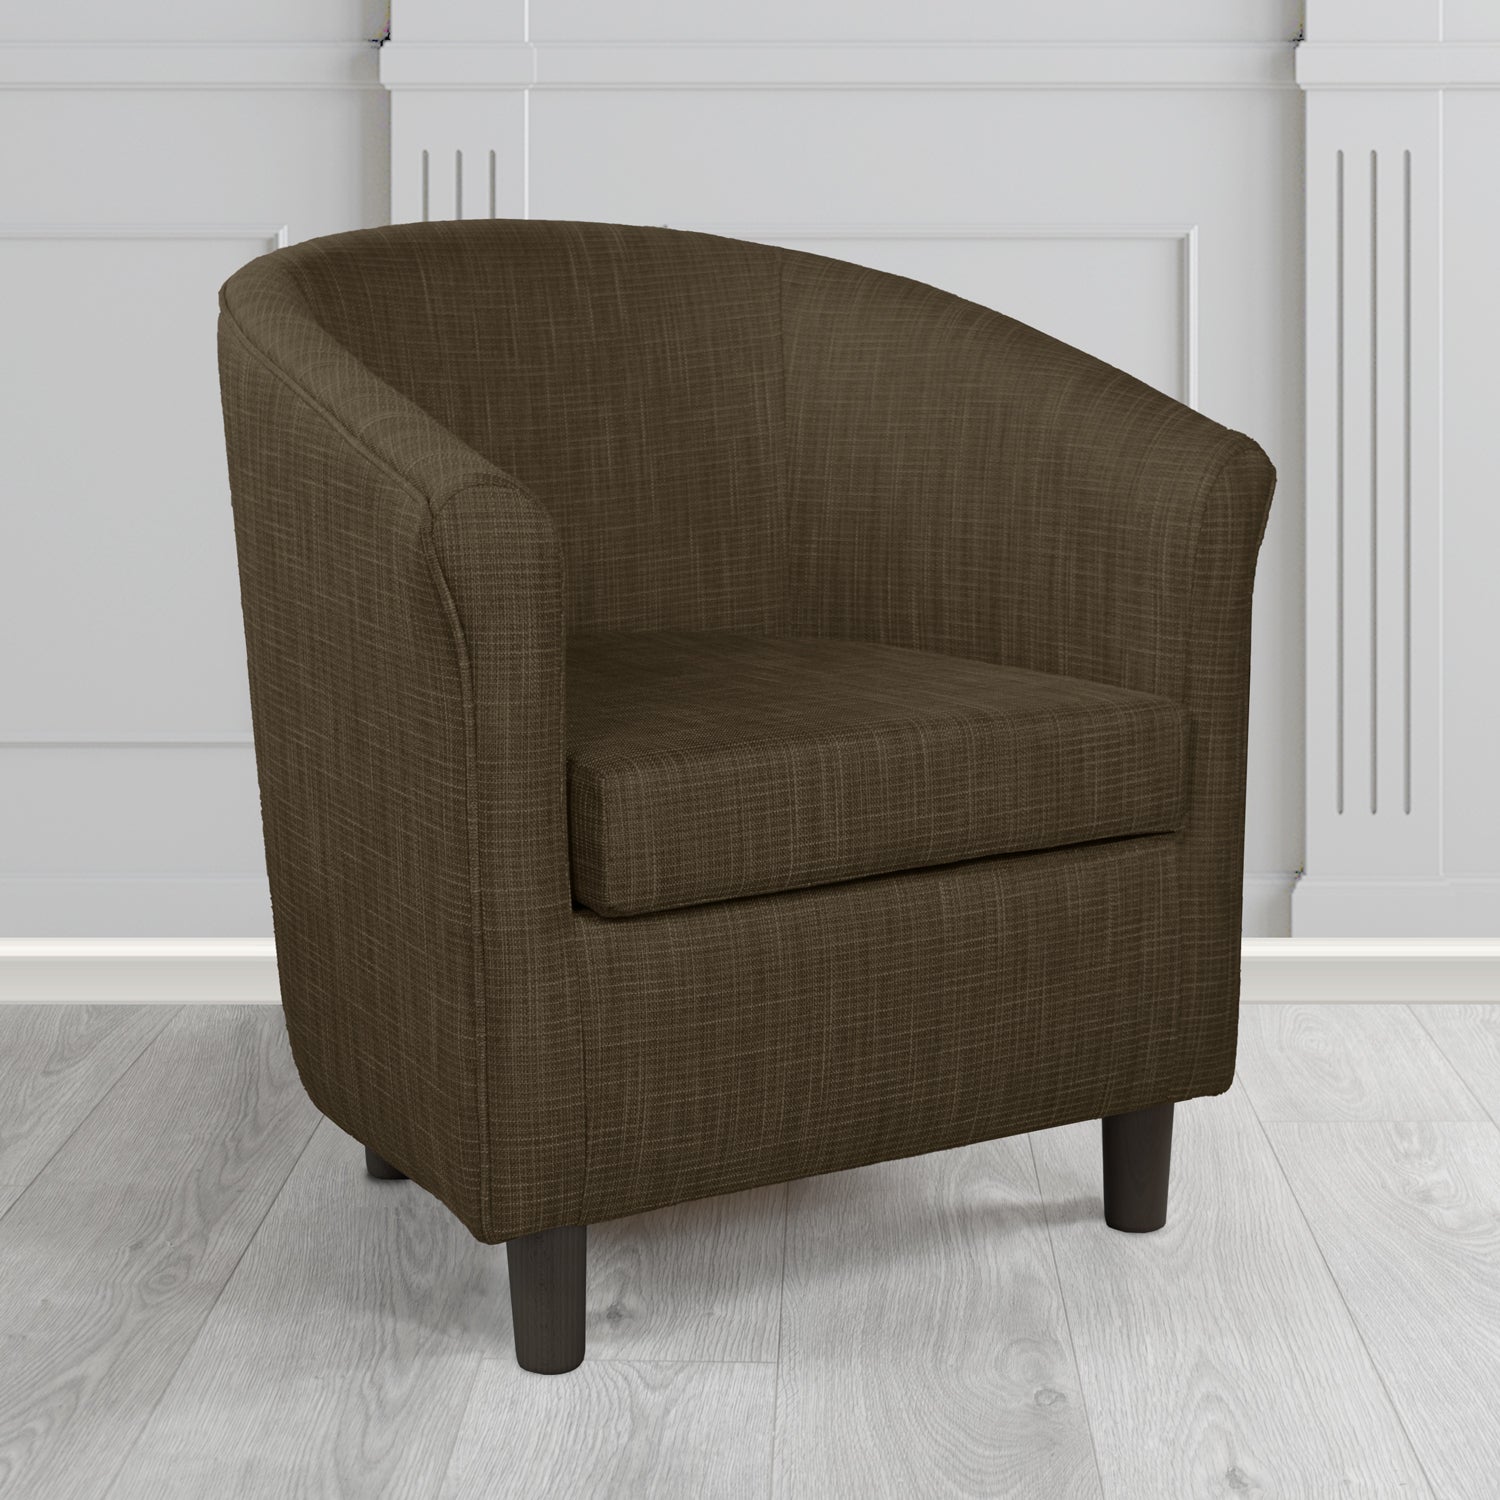 Tuscany Ravel Ganache Contract Crib 5 Fabric Tub Chair - Antimicrobial & Water-Resistant - The Tub Chair Shop